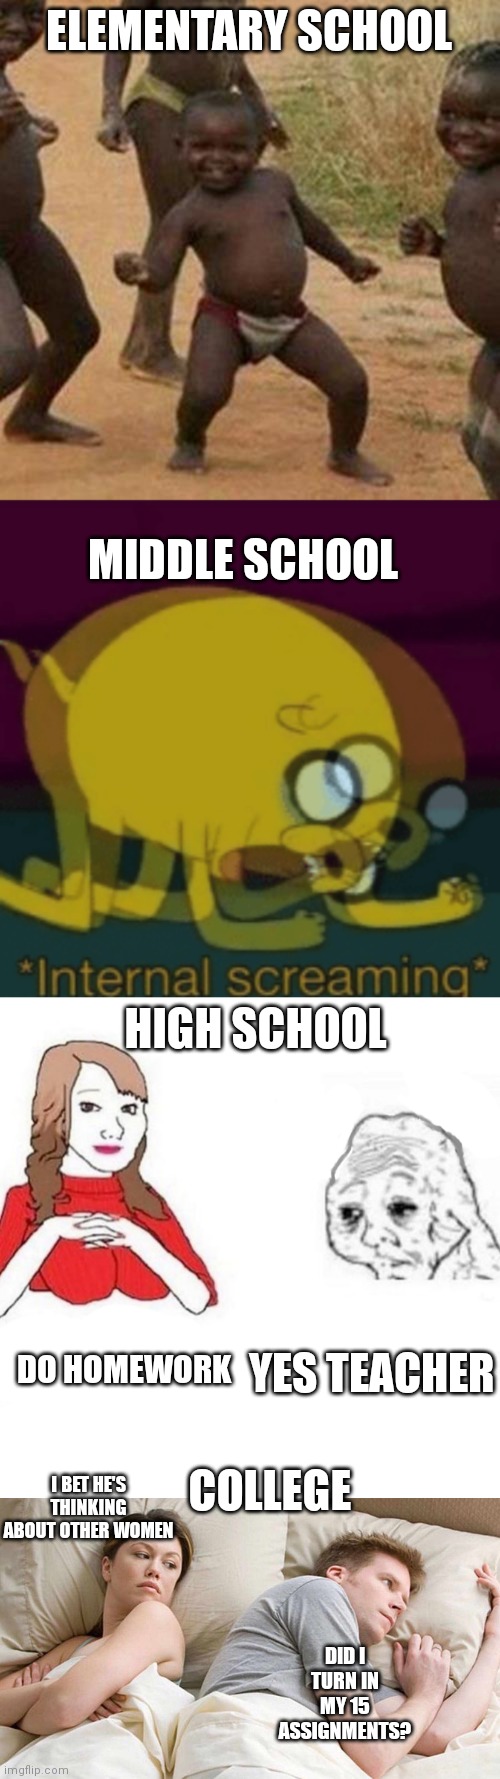 This took too much time to make | ELEMENTARY SCHOOL; MIDDLE SCHOOL; HIGH SCHOOL; DO HOMEWORK; YES TEACHER; COLLEGE; I BET HE'S THINKING ABOUT OTHER WOMEN; DID I TURN IN MY 15 ASSIGNMENTS? | image tagged in memes,third world success kid,jake the dog internal screaming,yes honey,i bet he's thinking about other women,school | made w/ Imgflip meme maker